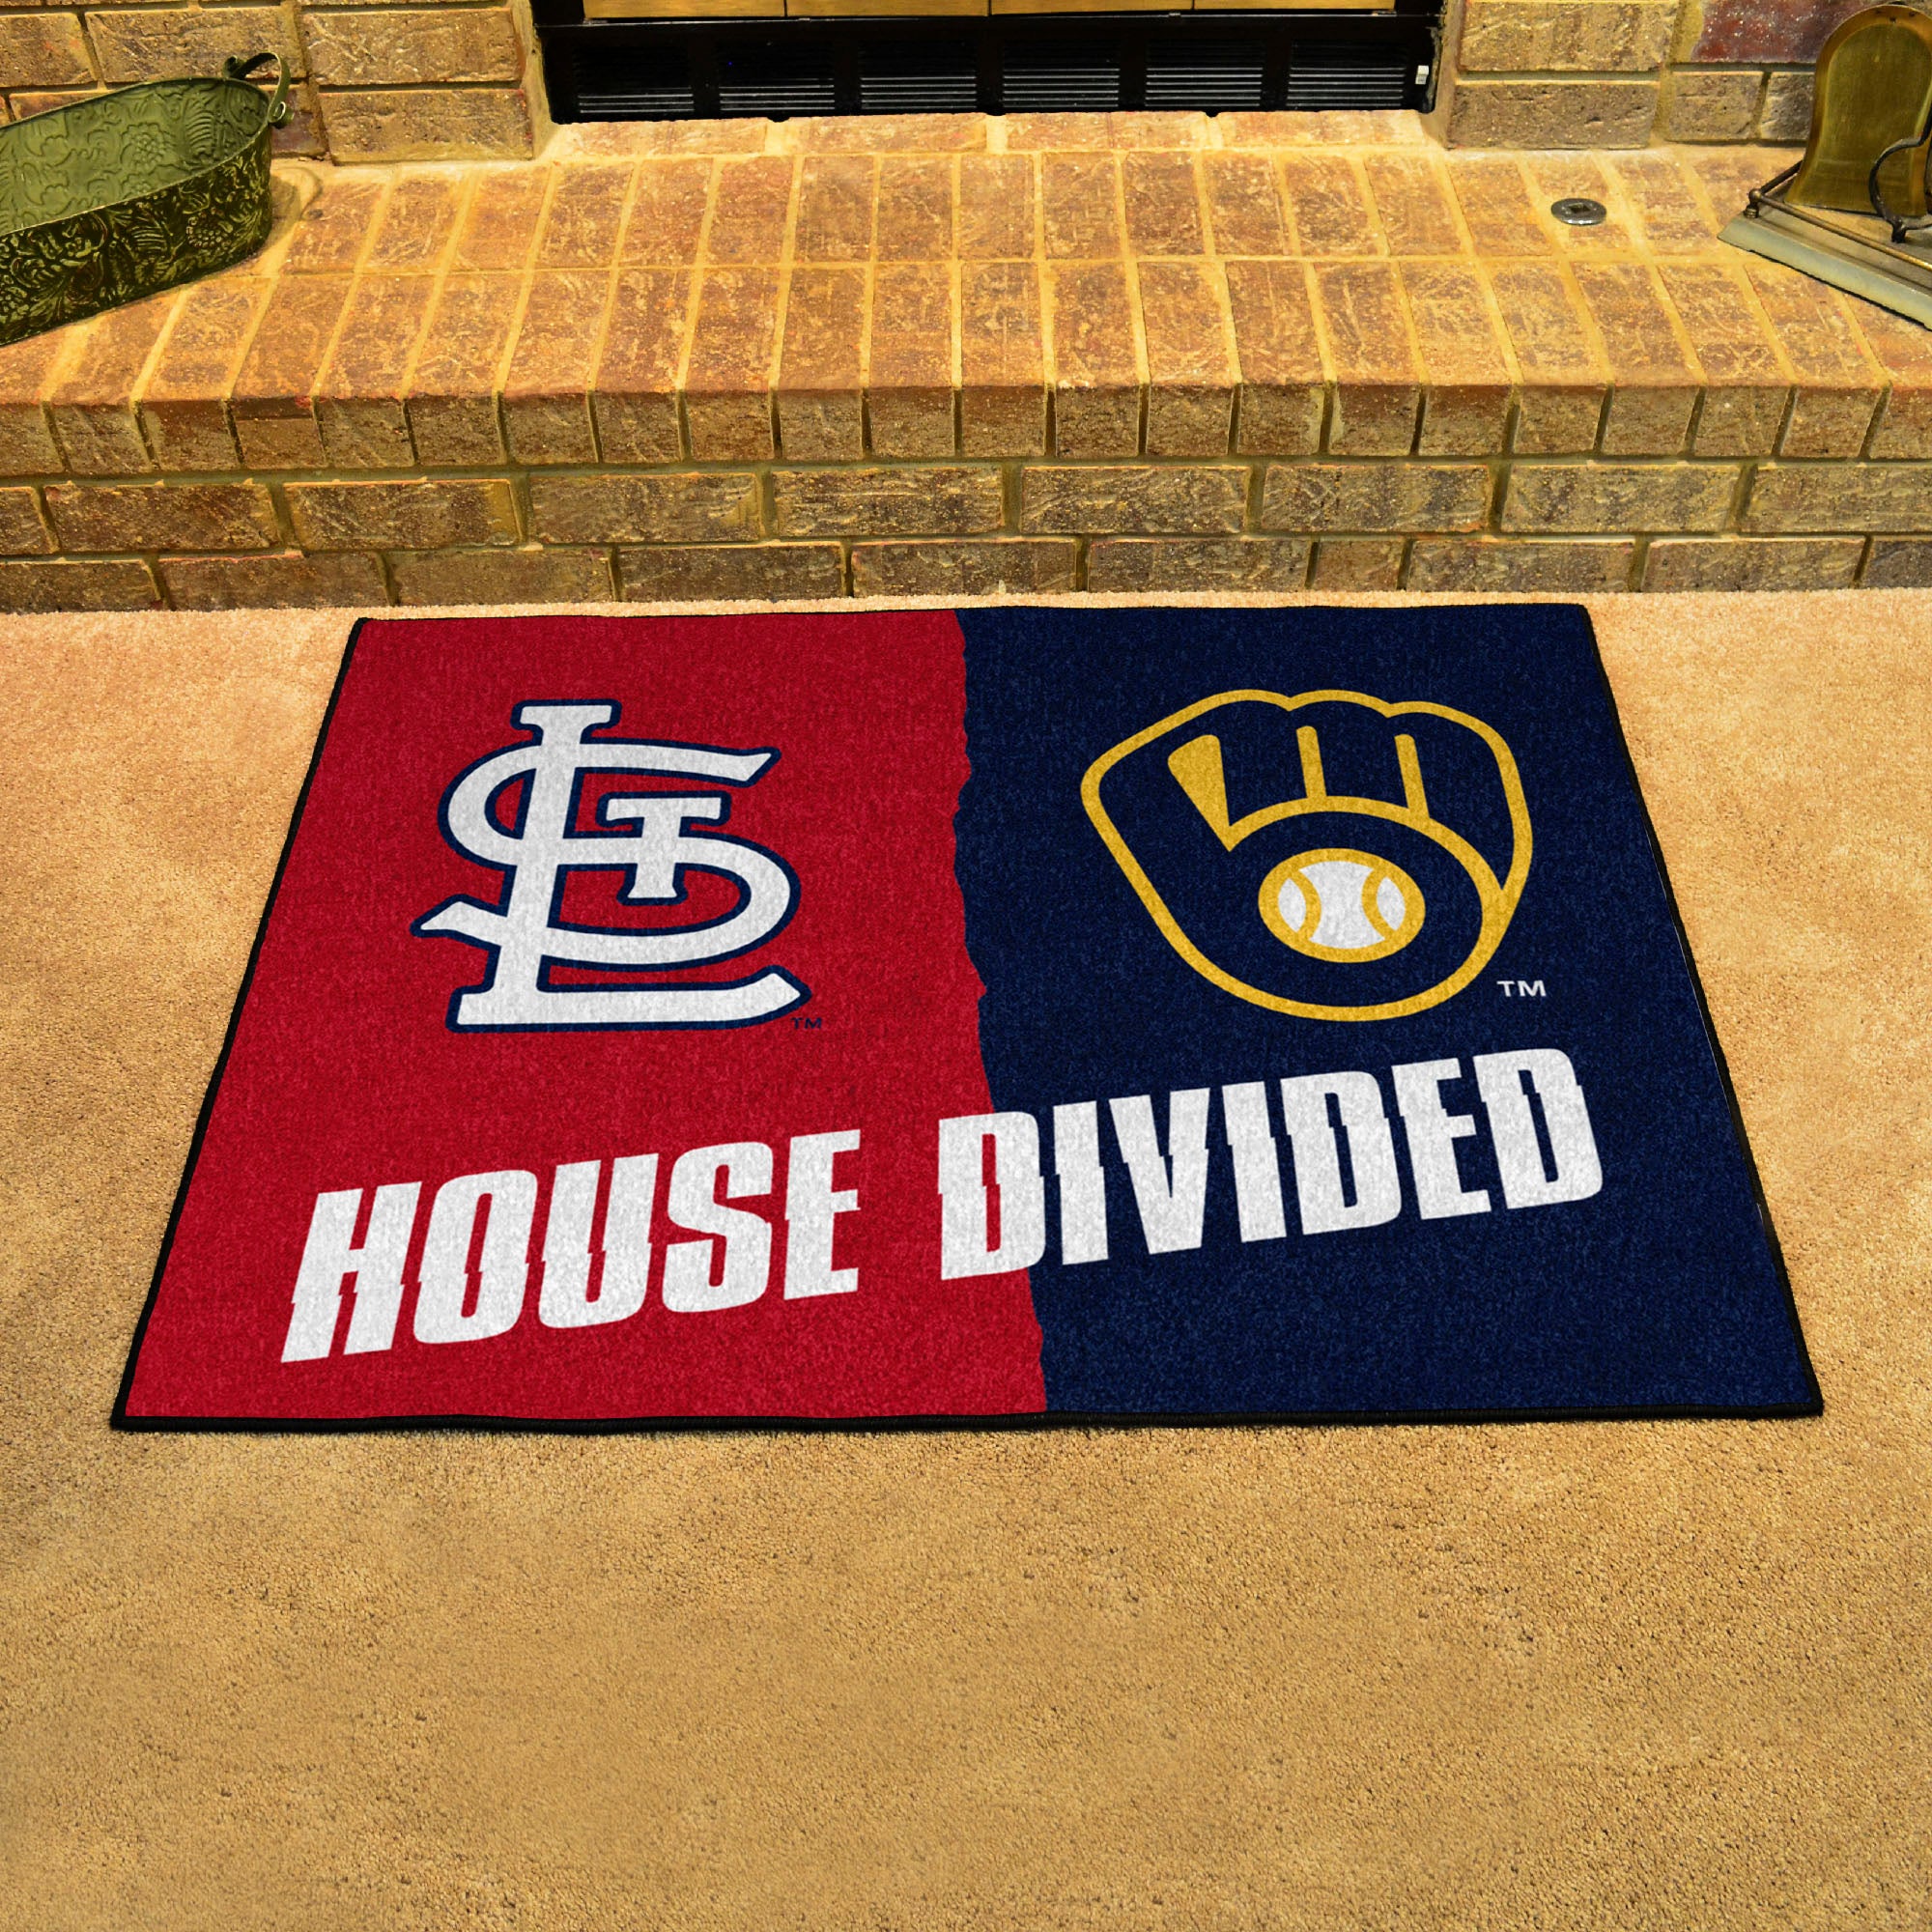 FANMATS, MLB House Divided - Cardinals / Brewers House Divided Rug